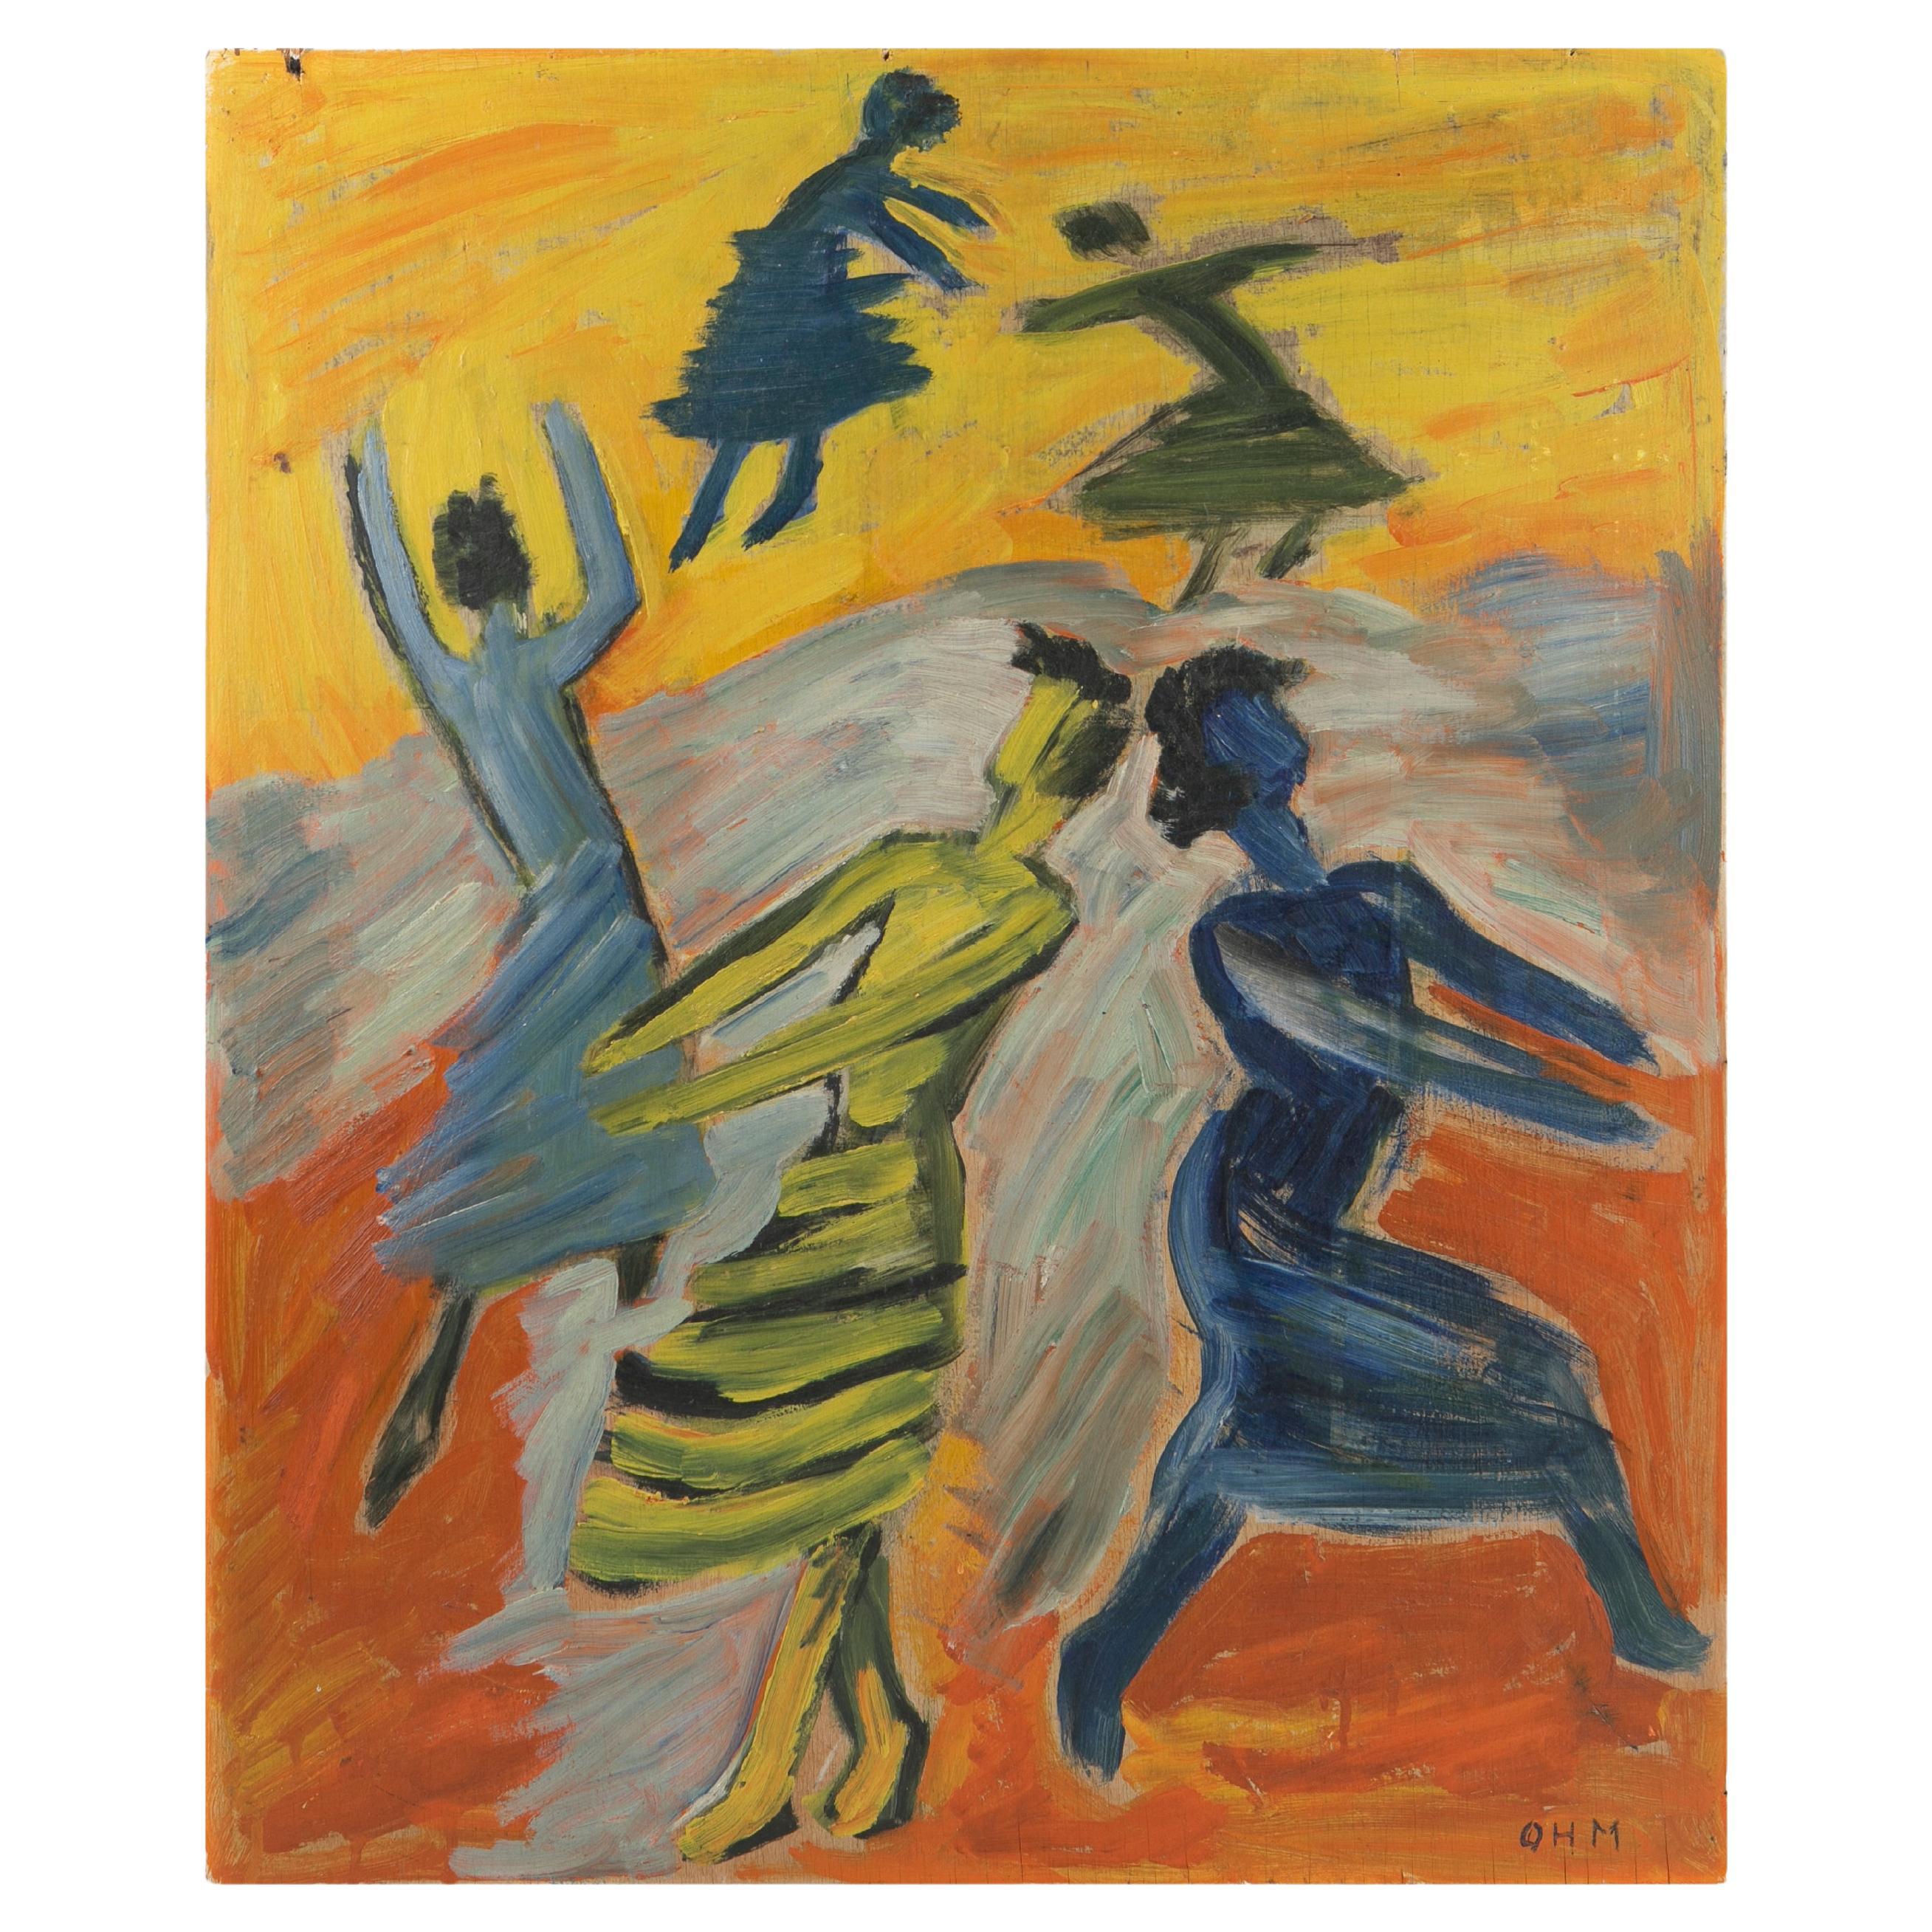 Painting By Olivia Holm-Møller  'Dancing Women' For Sale